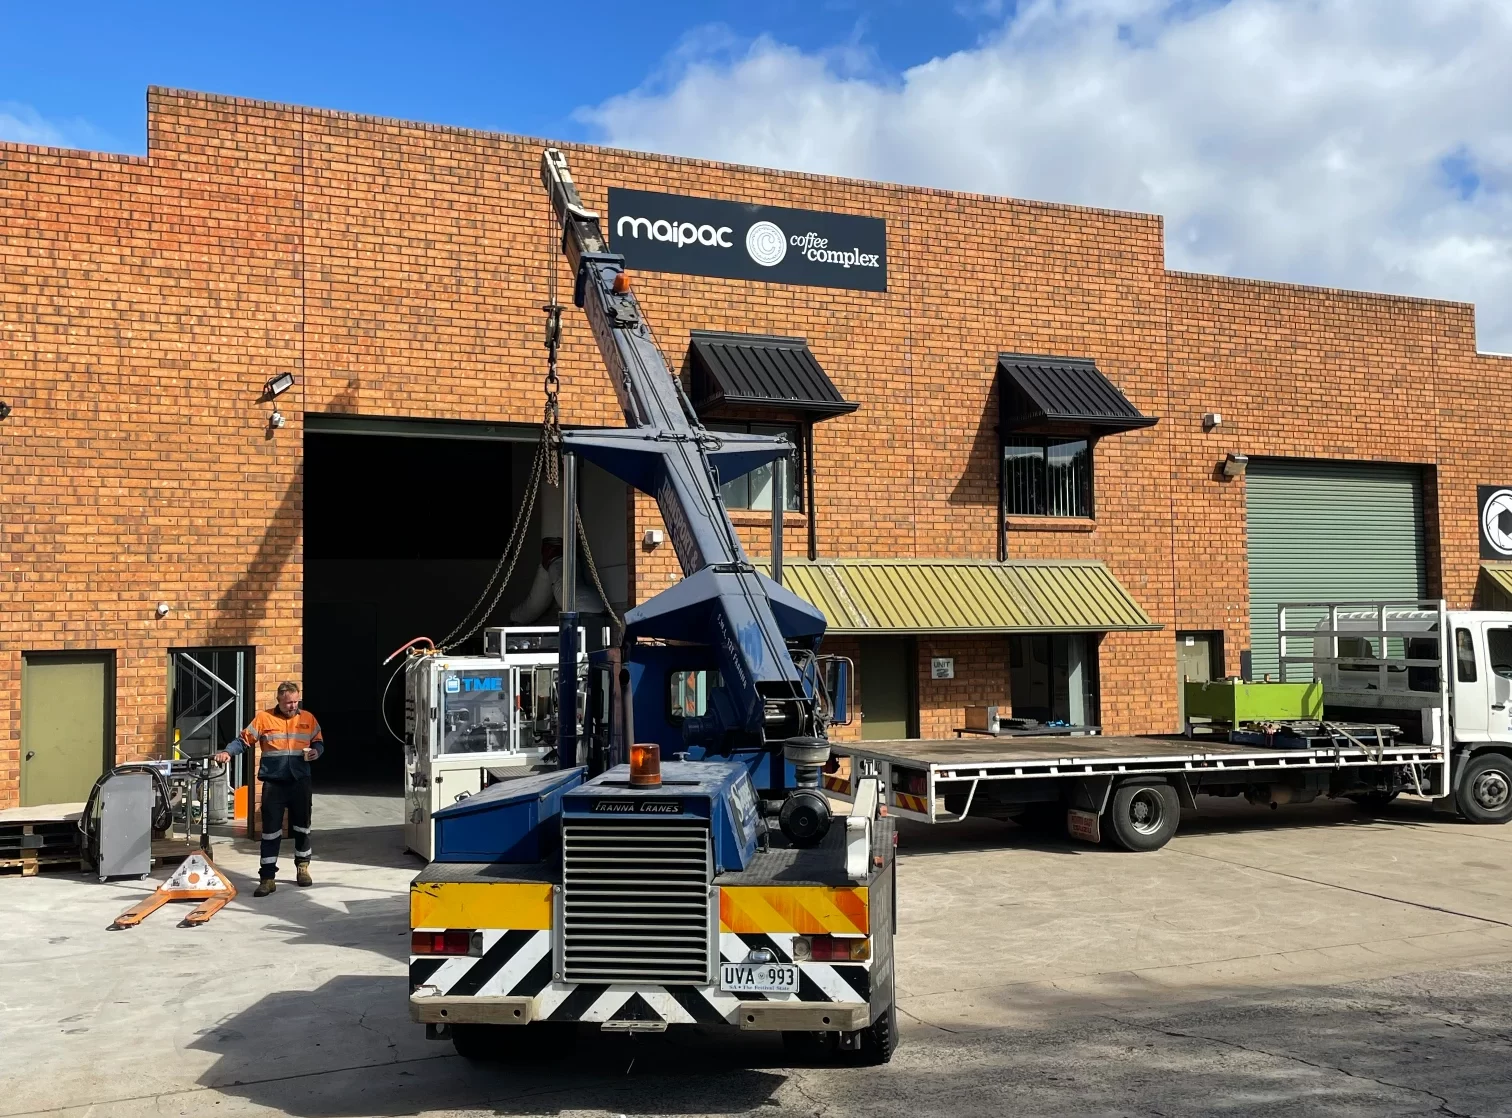 Small crane preparing to lift up a piece of coffee equipment infront of the Maipac coffee pod warehouse in Adelaide